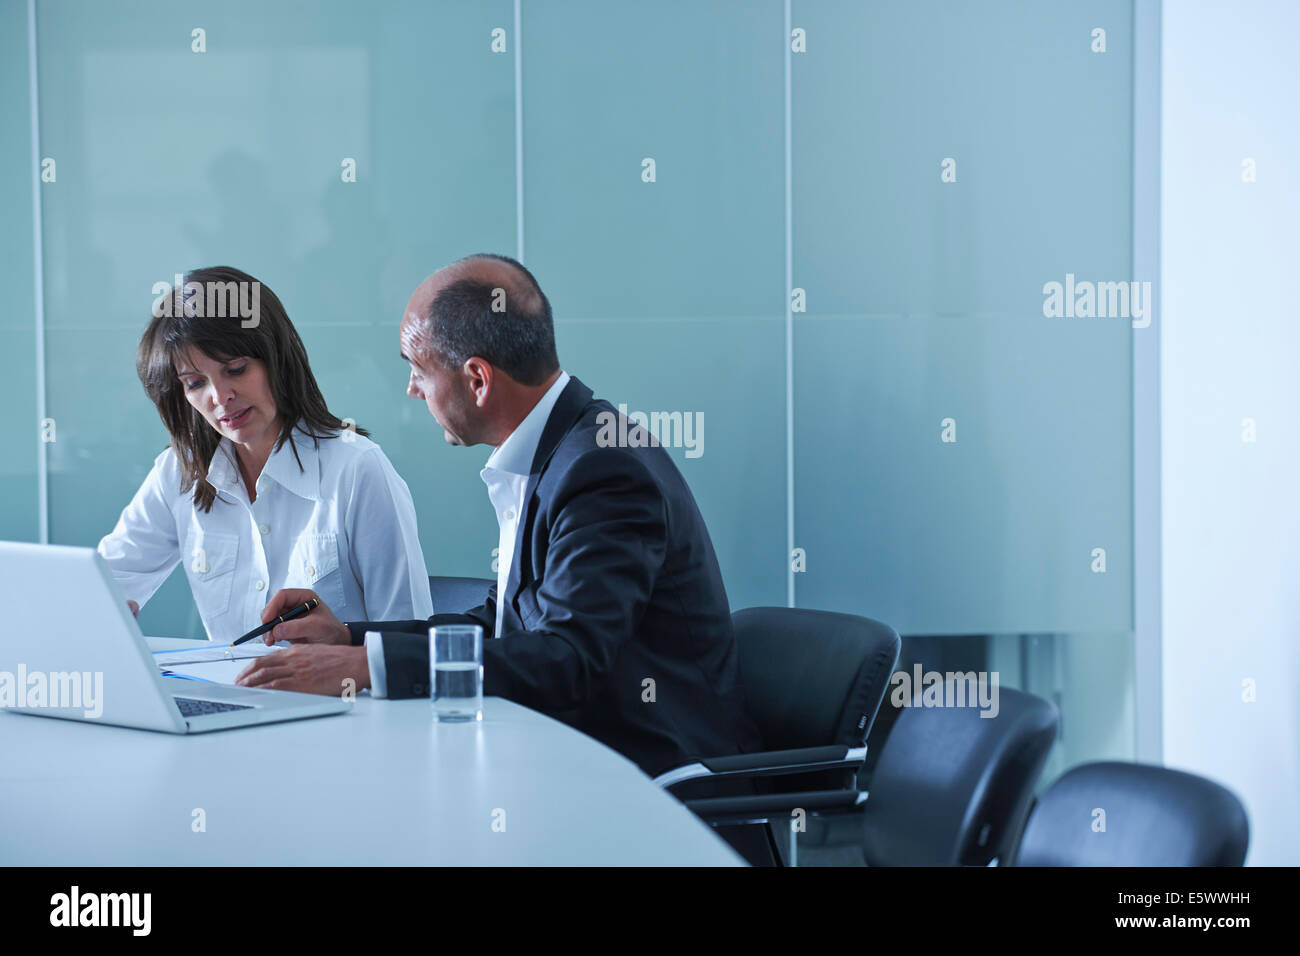 Businesswoman and man doing paperwork at boardroom table Stock Photo